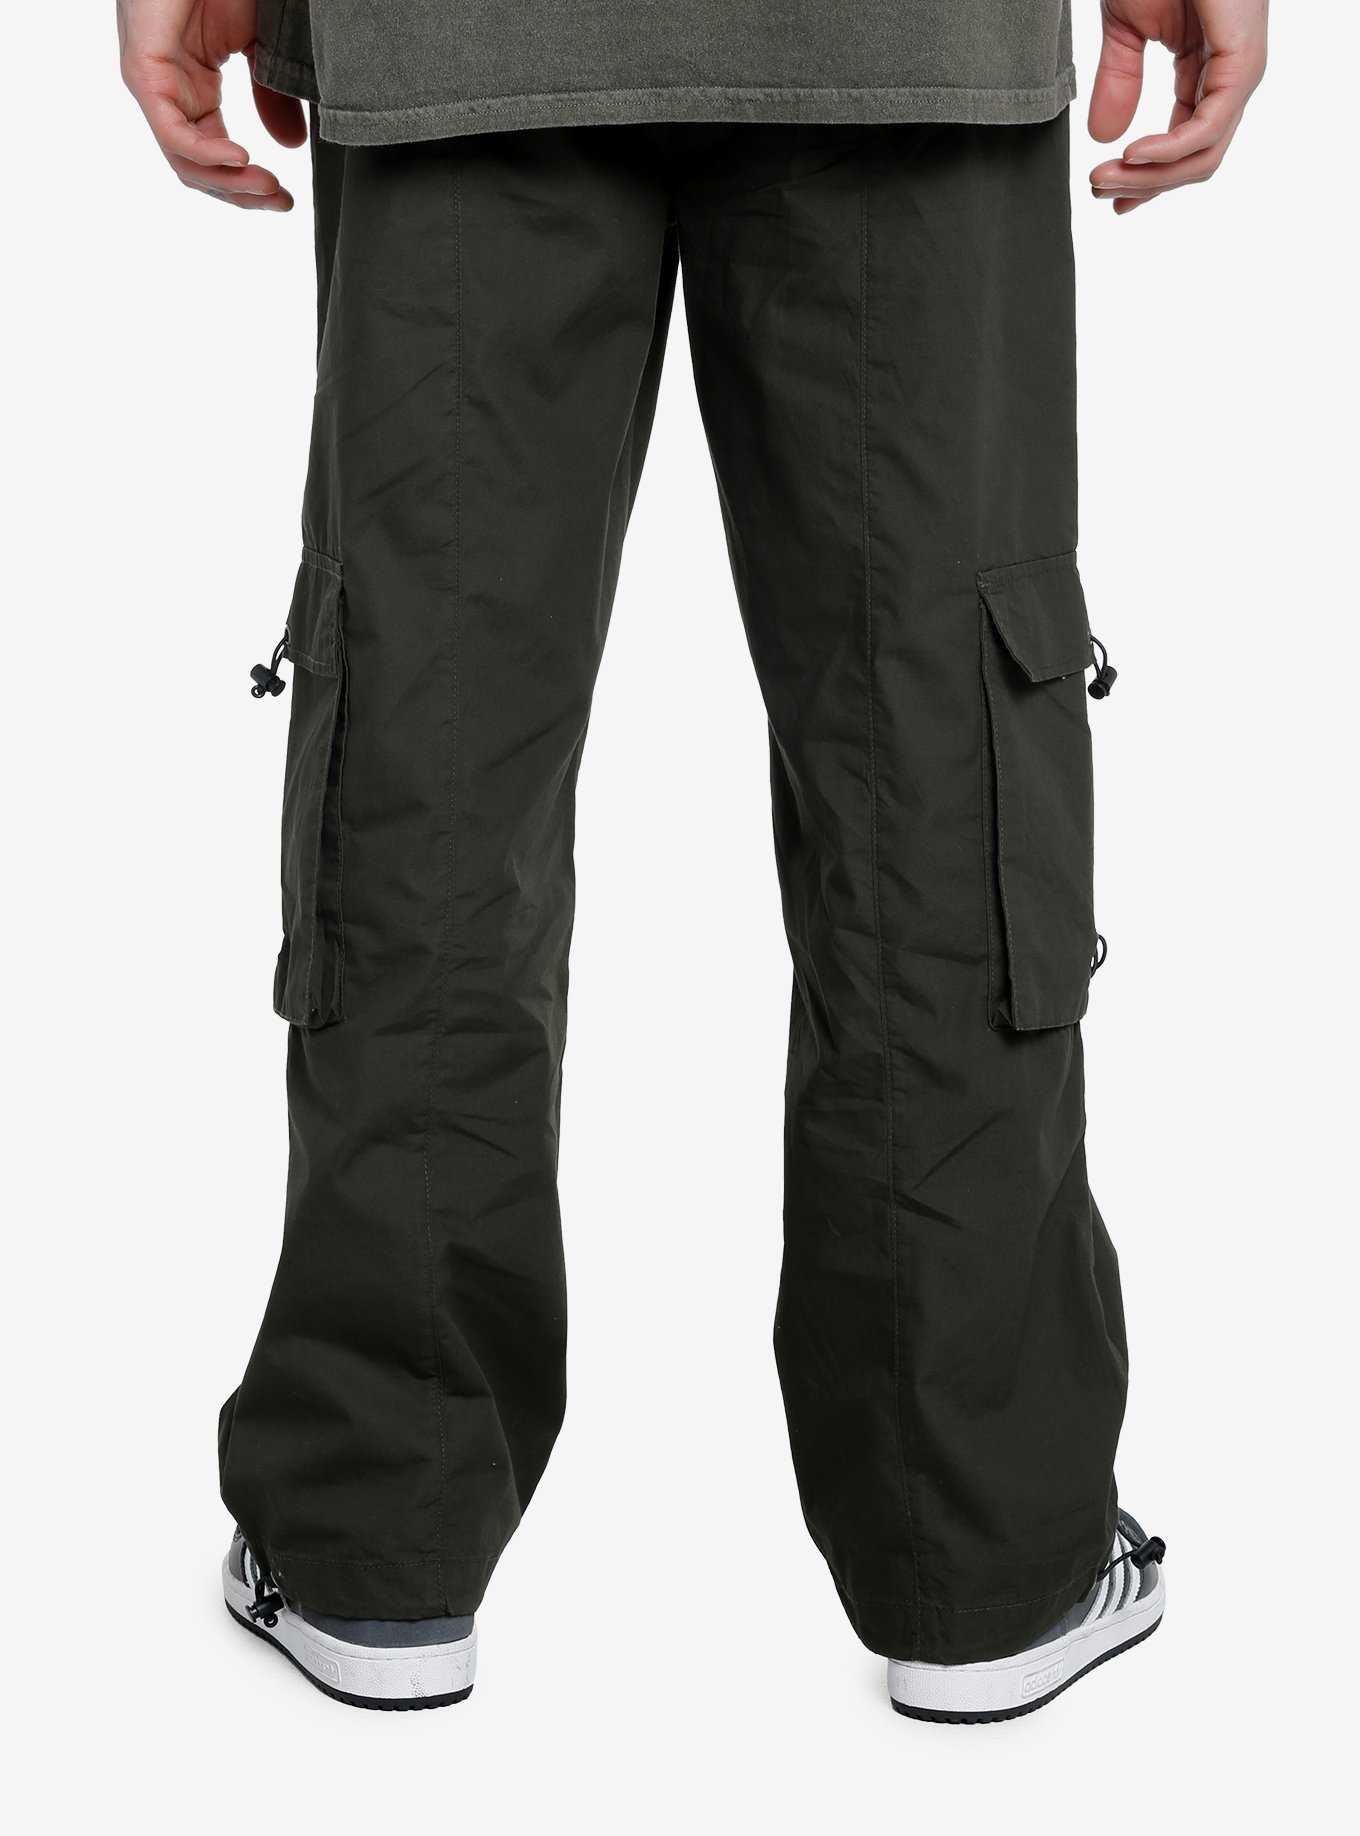 Olive Bungee Cord Cargo Pants, , hi-res